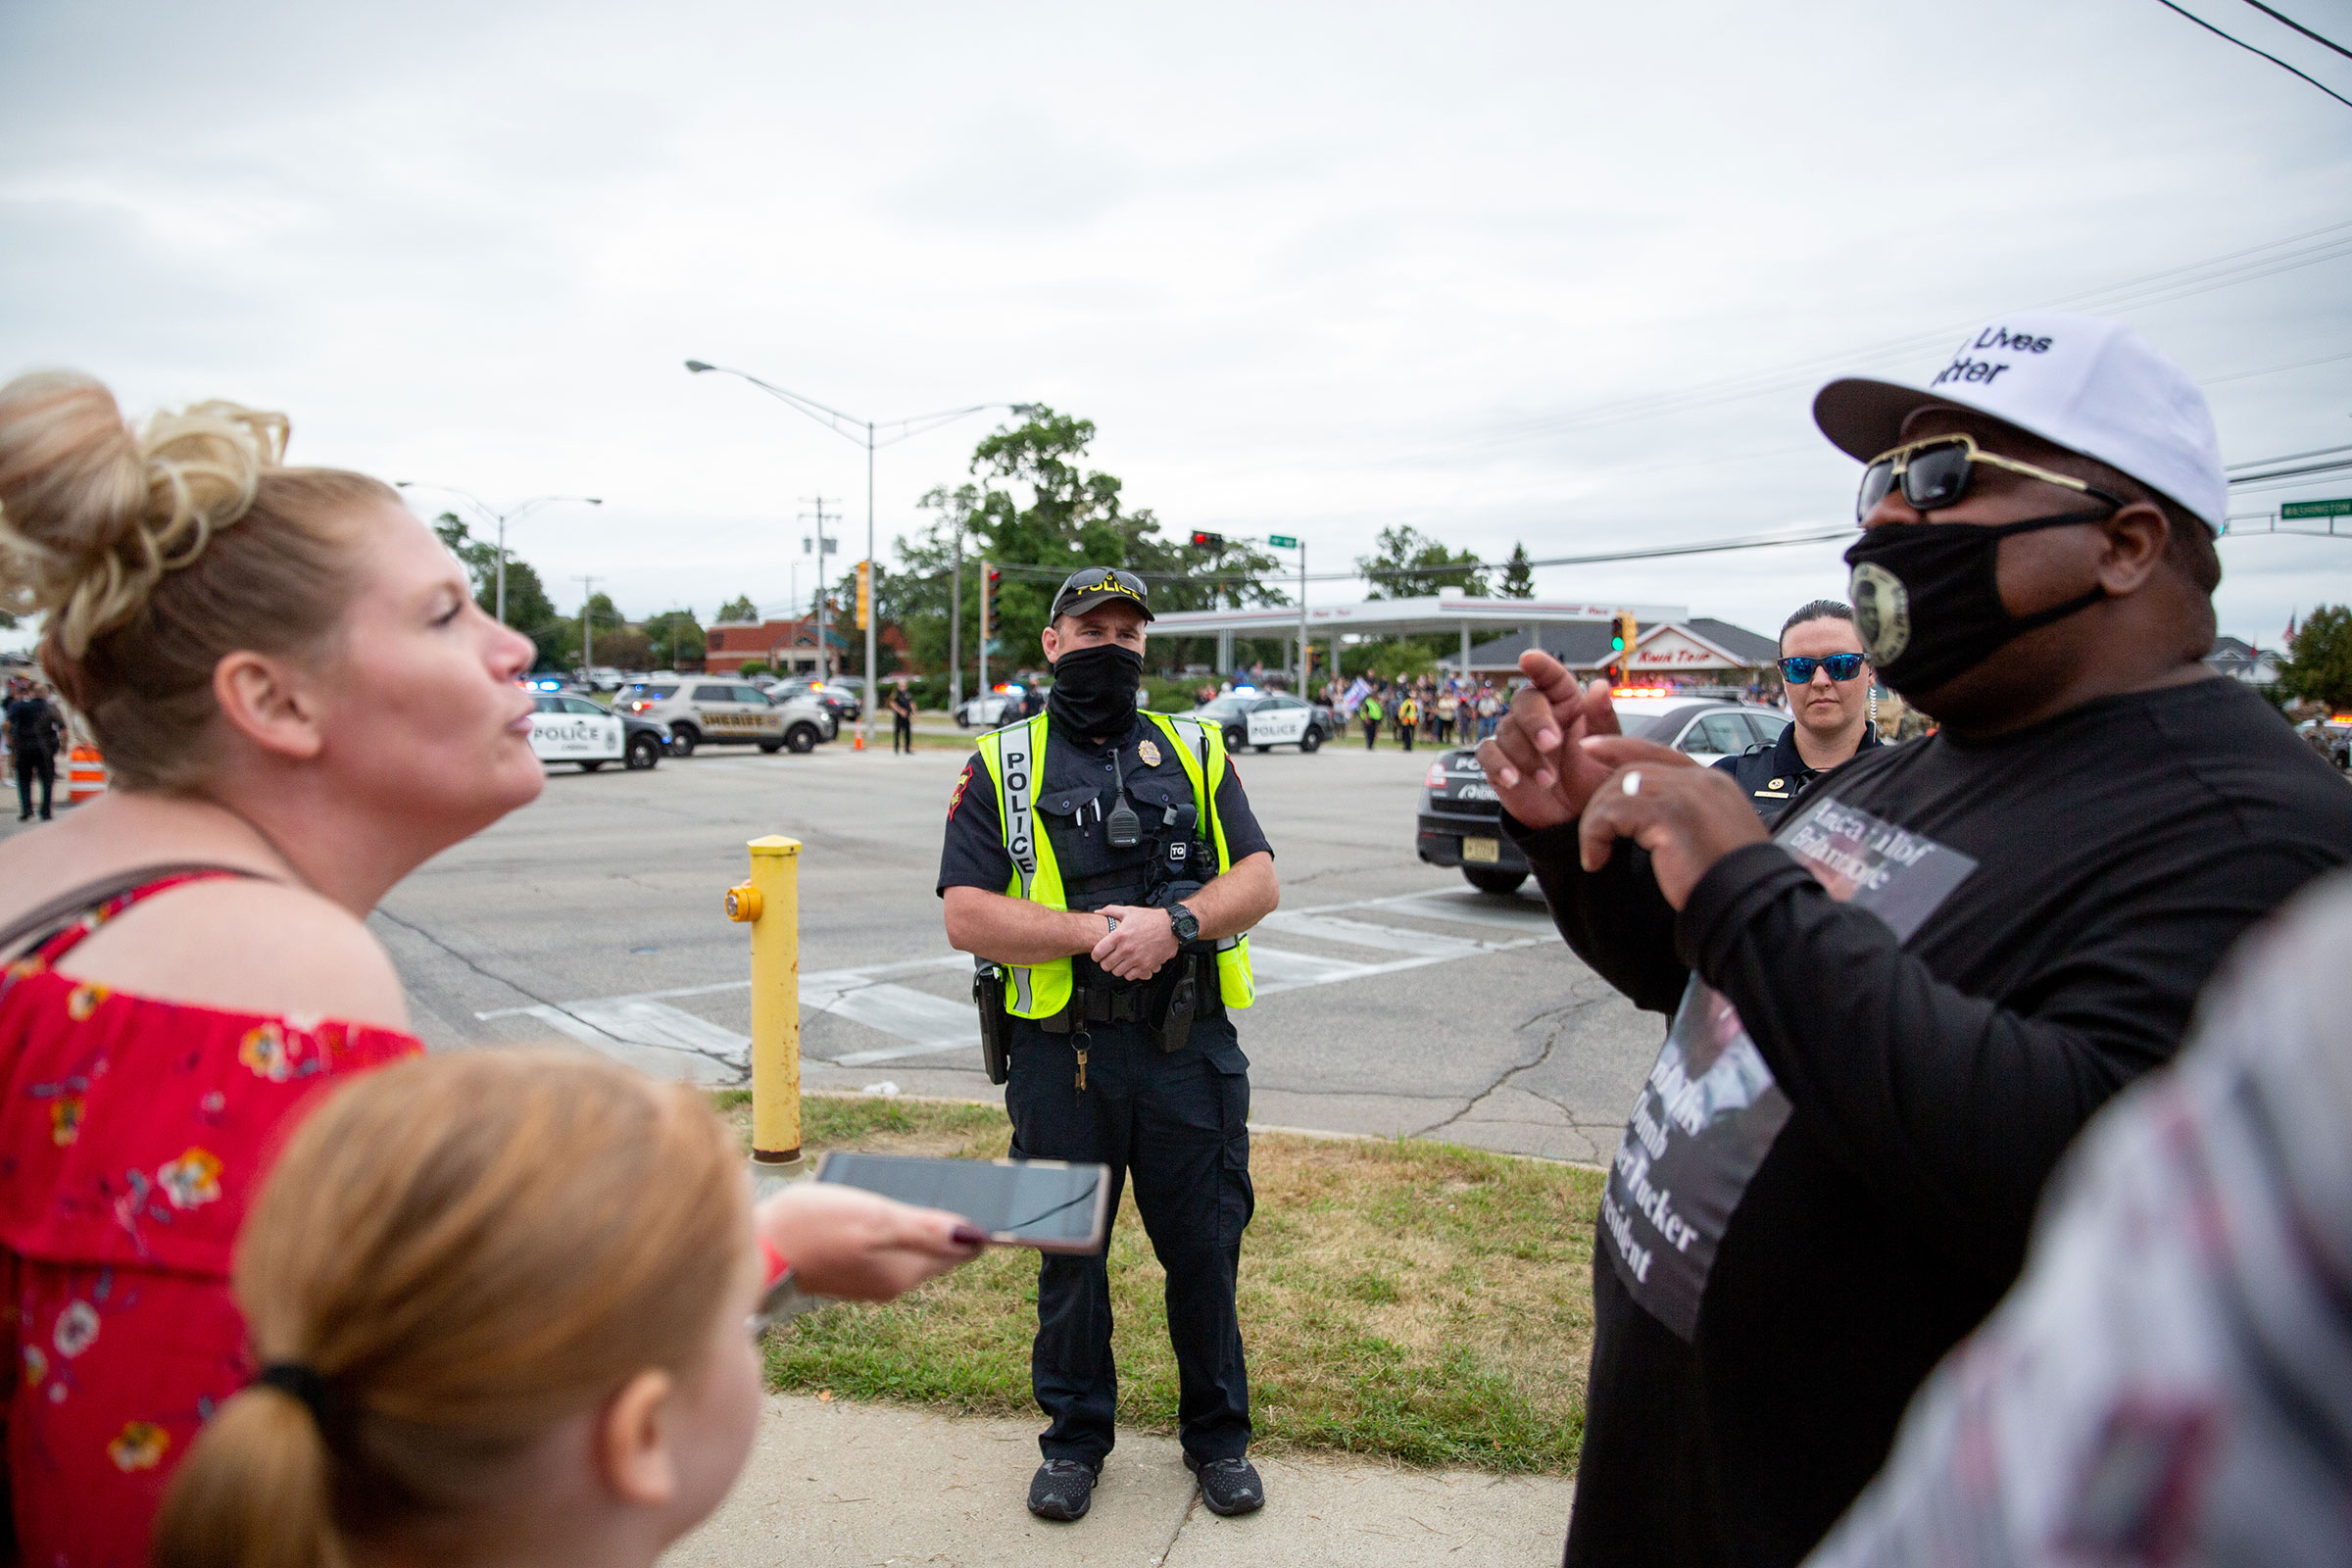 Police watch protestors during President Trump's meeting at Bradford High School in Kenosha, Wis., on Sept. 1, 2020. (Patience Zalanga for TIME)